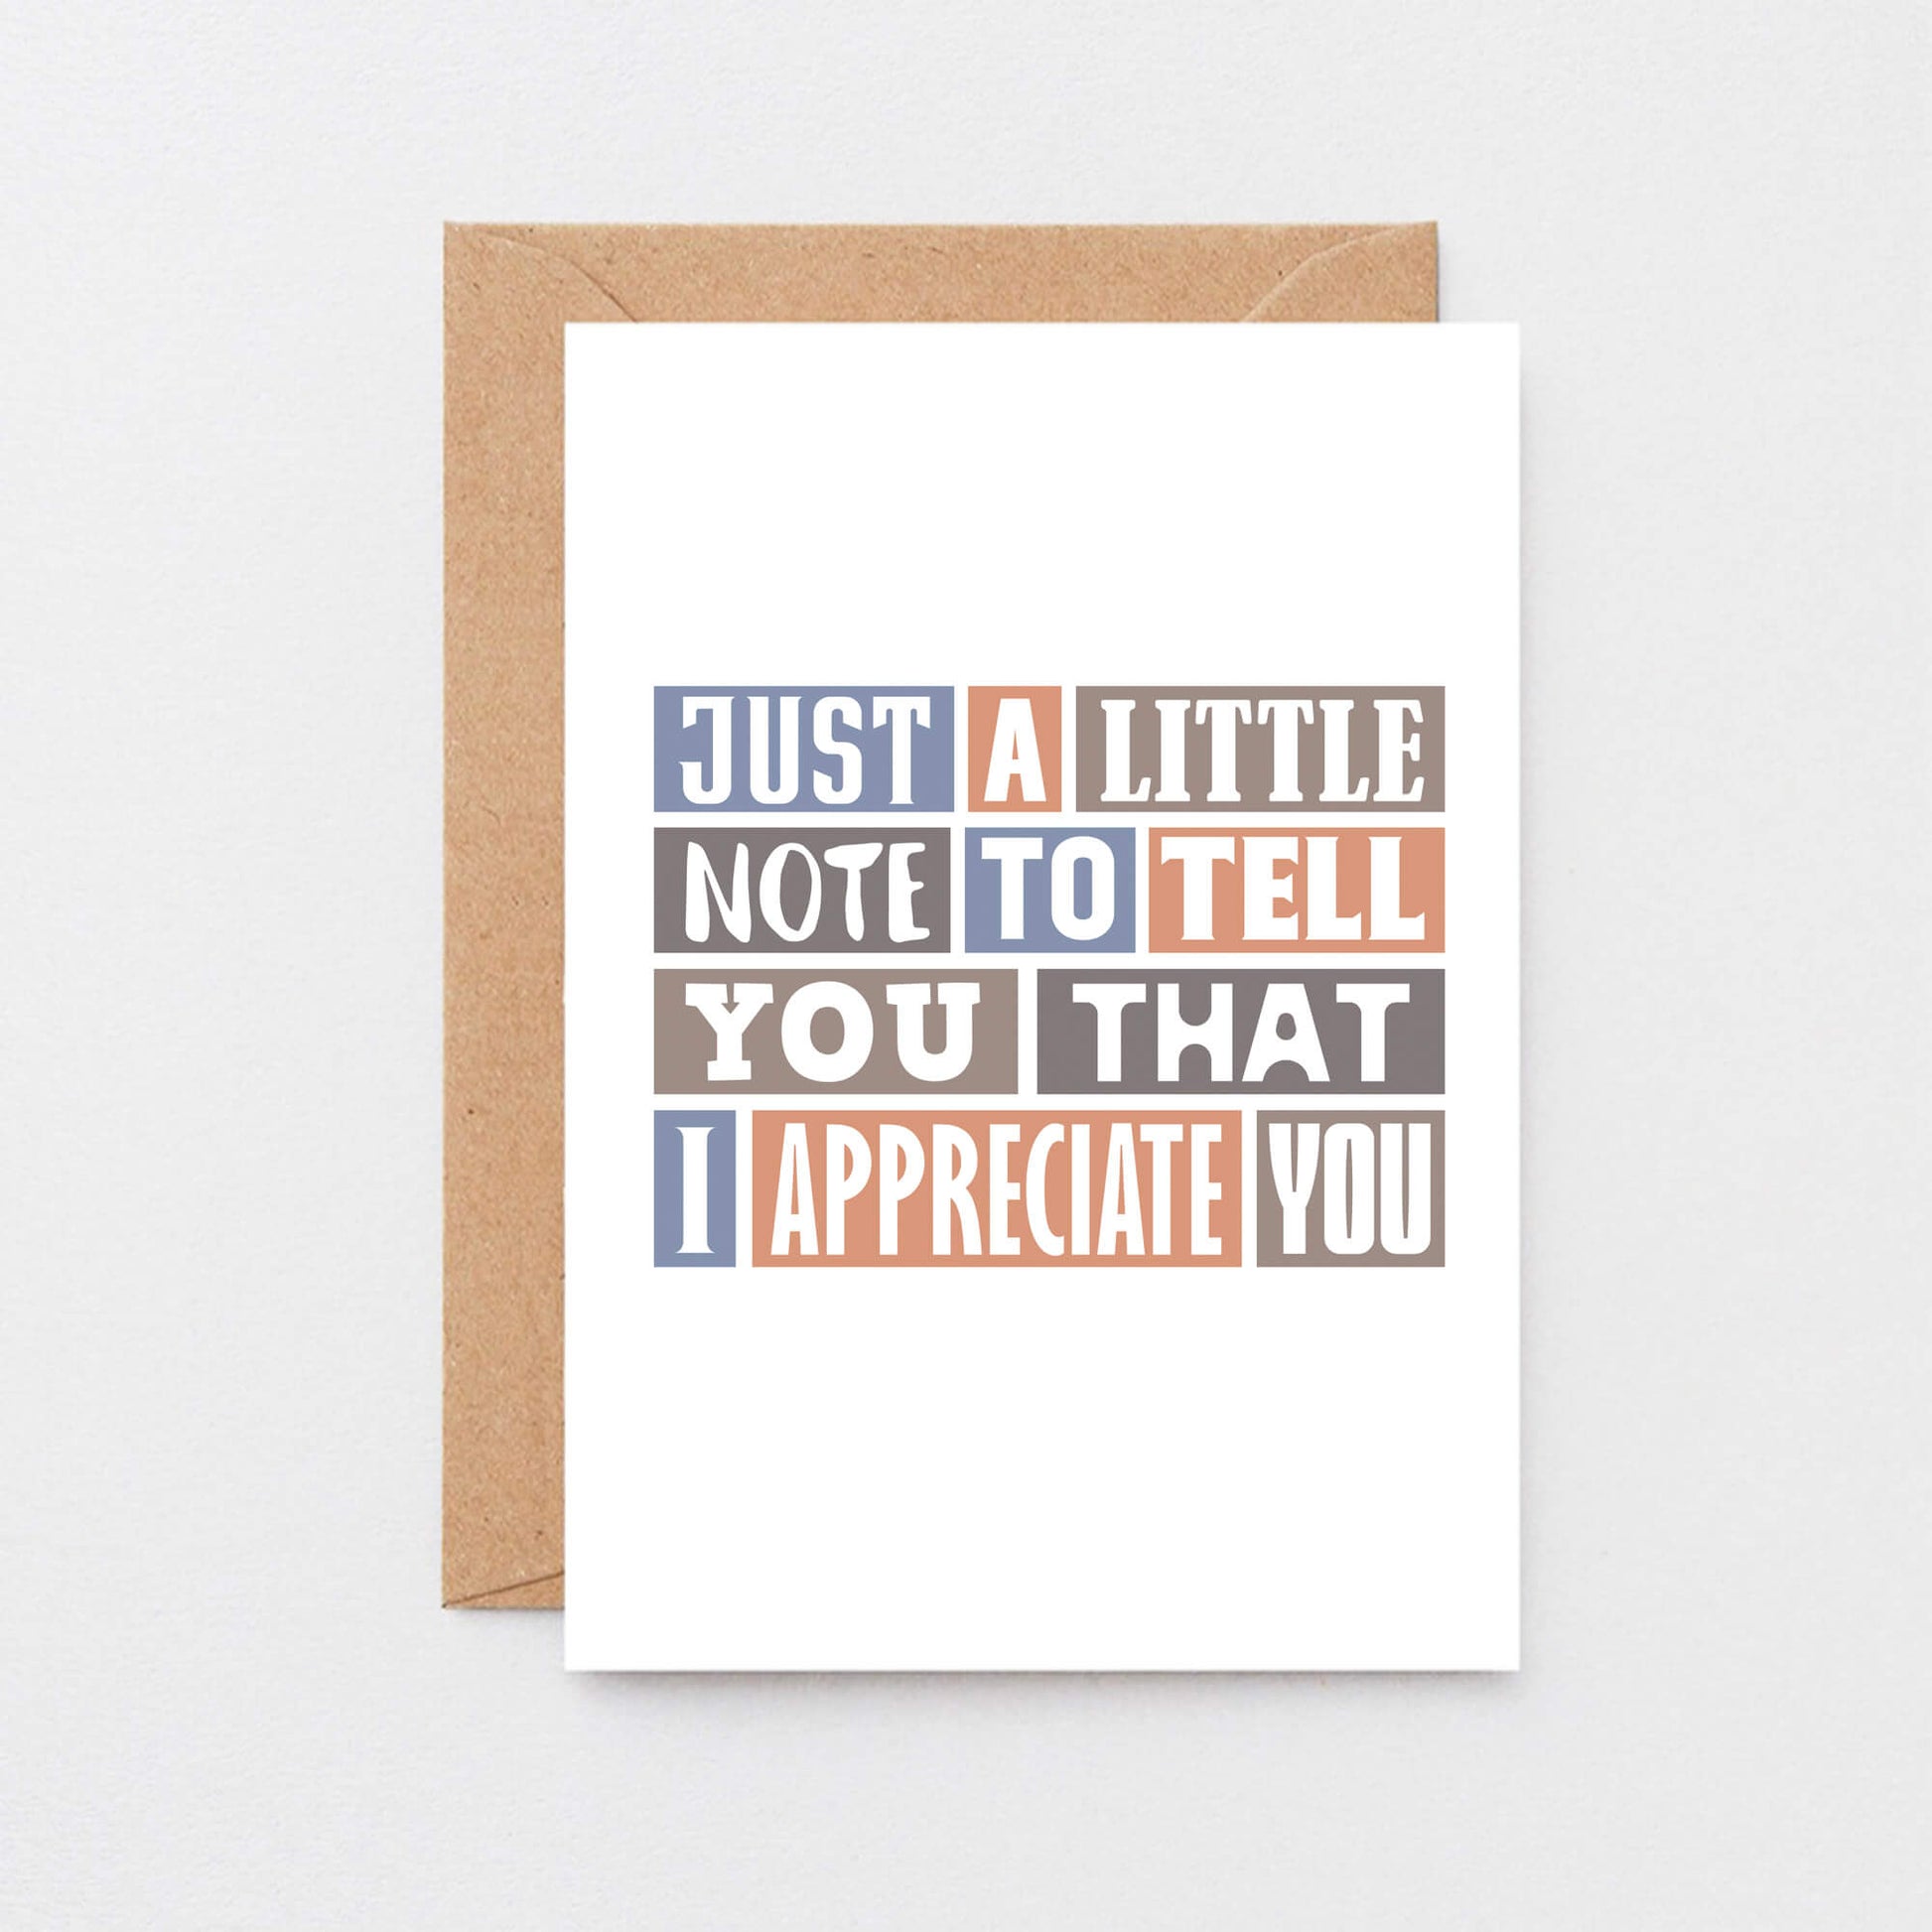 Appreciation Card by SixElevenCreations. Reads Just a little note to tell you that I appreciate you. Product Code SE0234A6